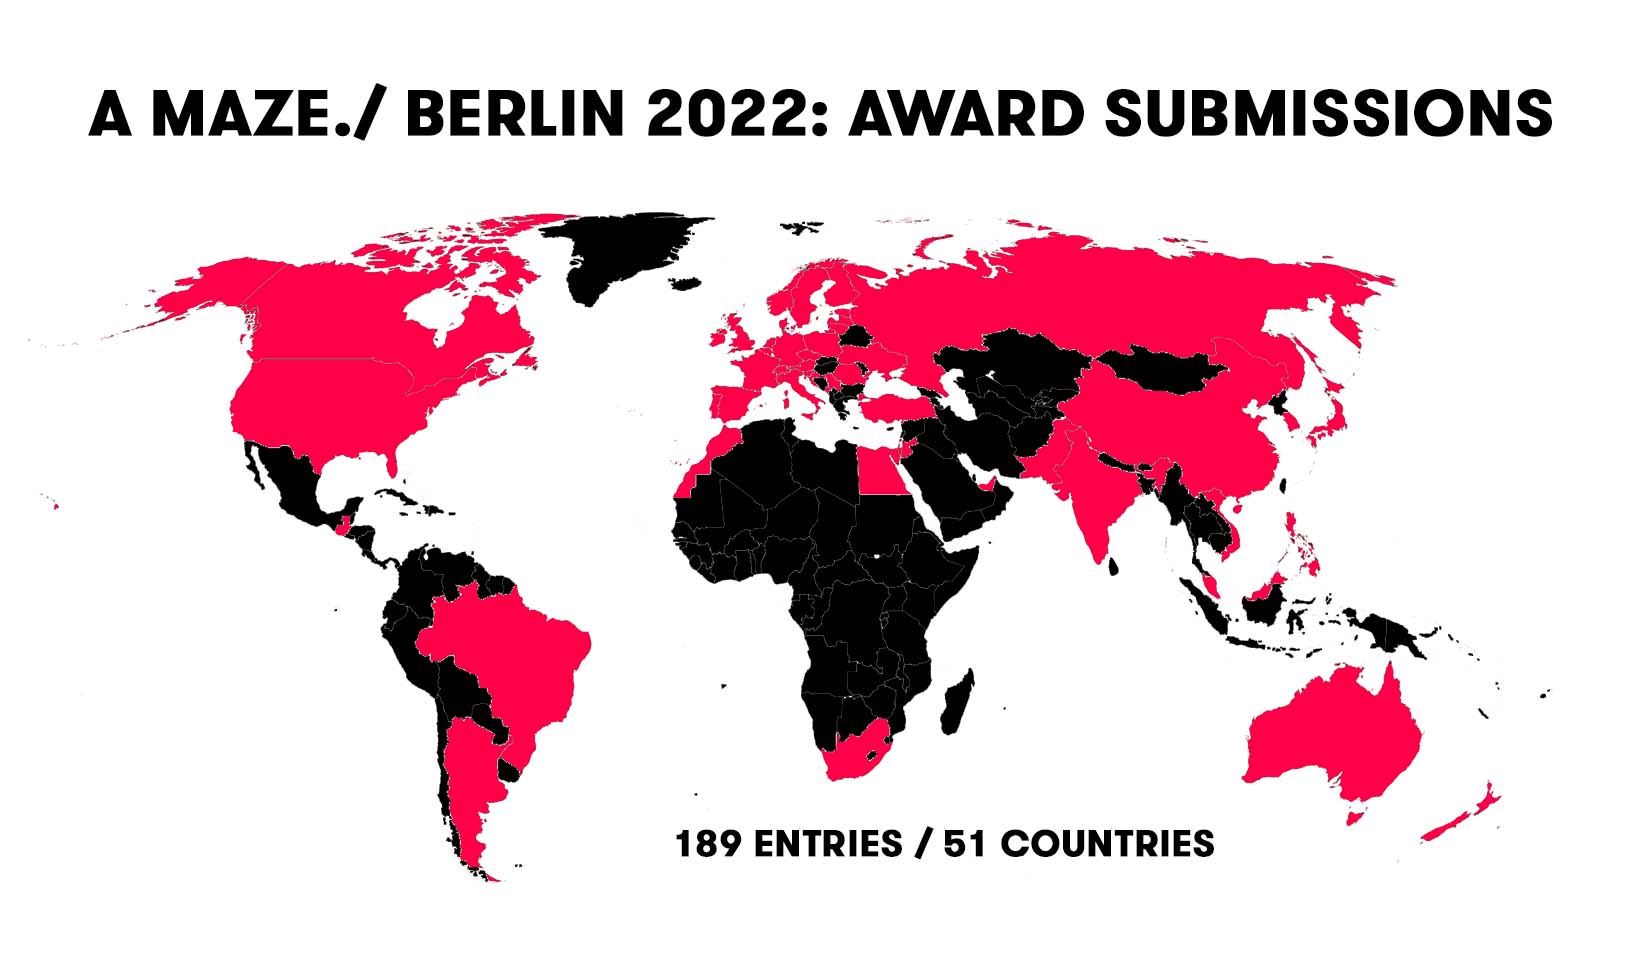 A MAZE. / Berlin 2022 Award Submissions from 51 Countries